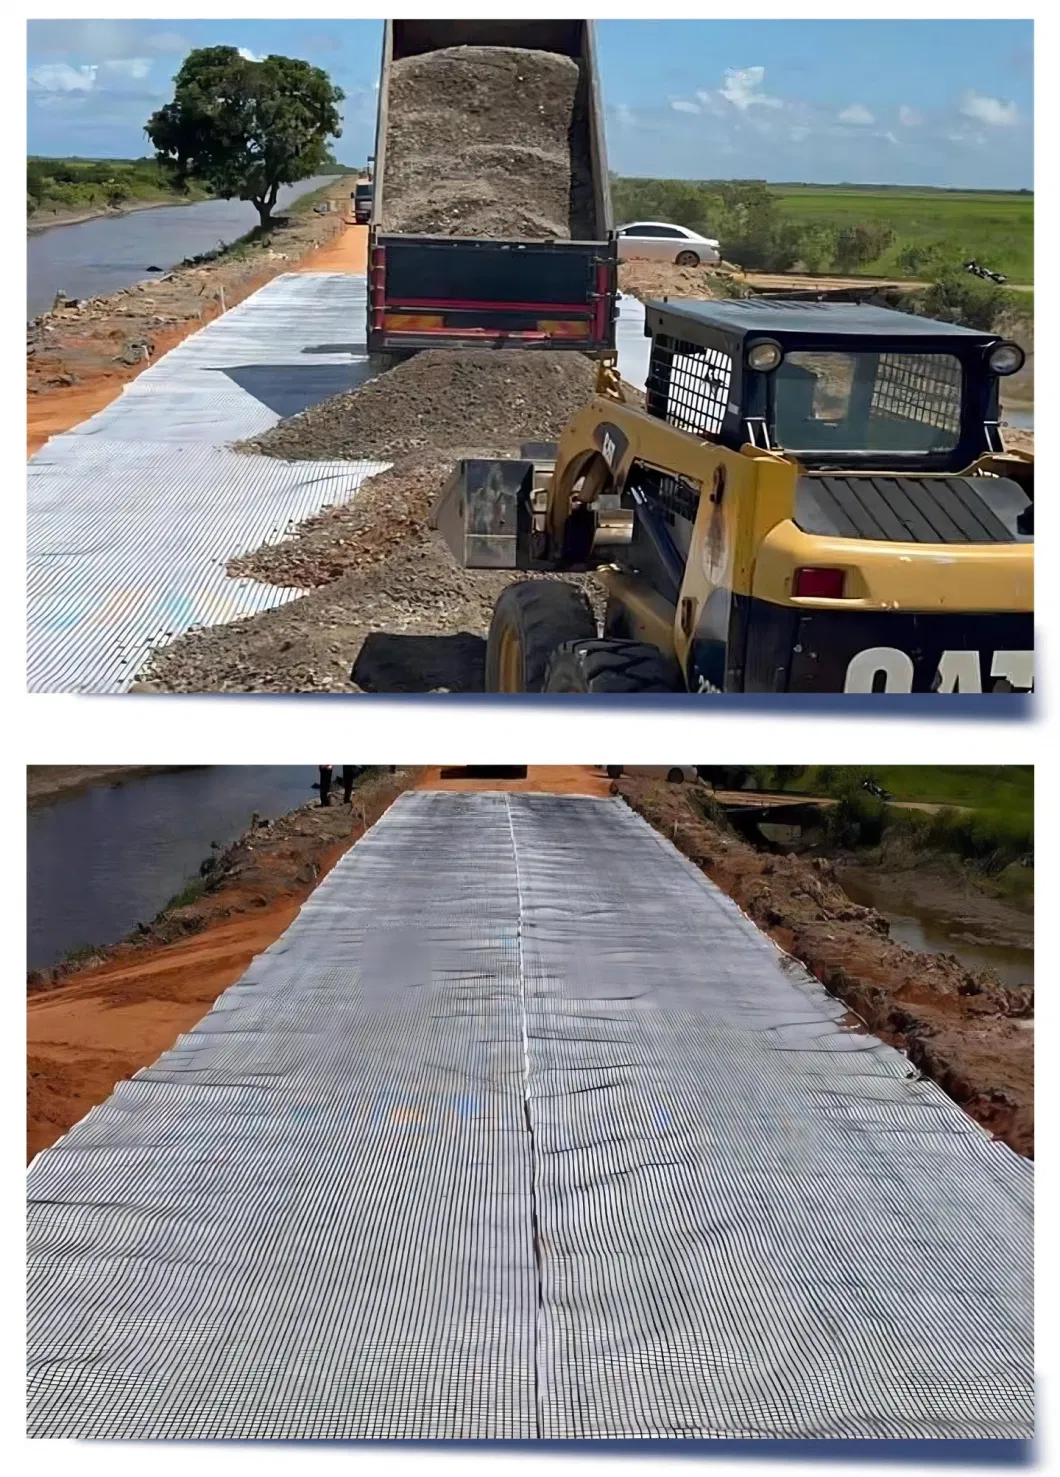 Fiber Glass Steel Plastic PP Pet Composite Geogrid with Geotextile for Road Construction Global Hot Sold